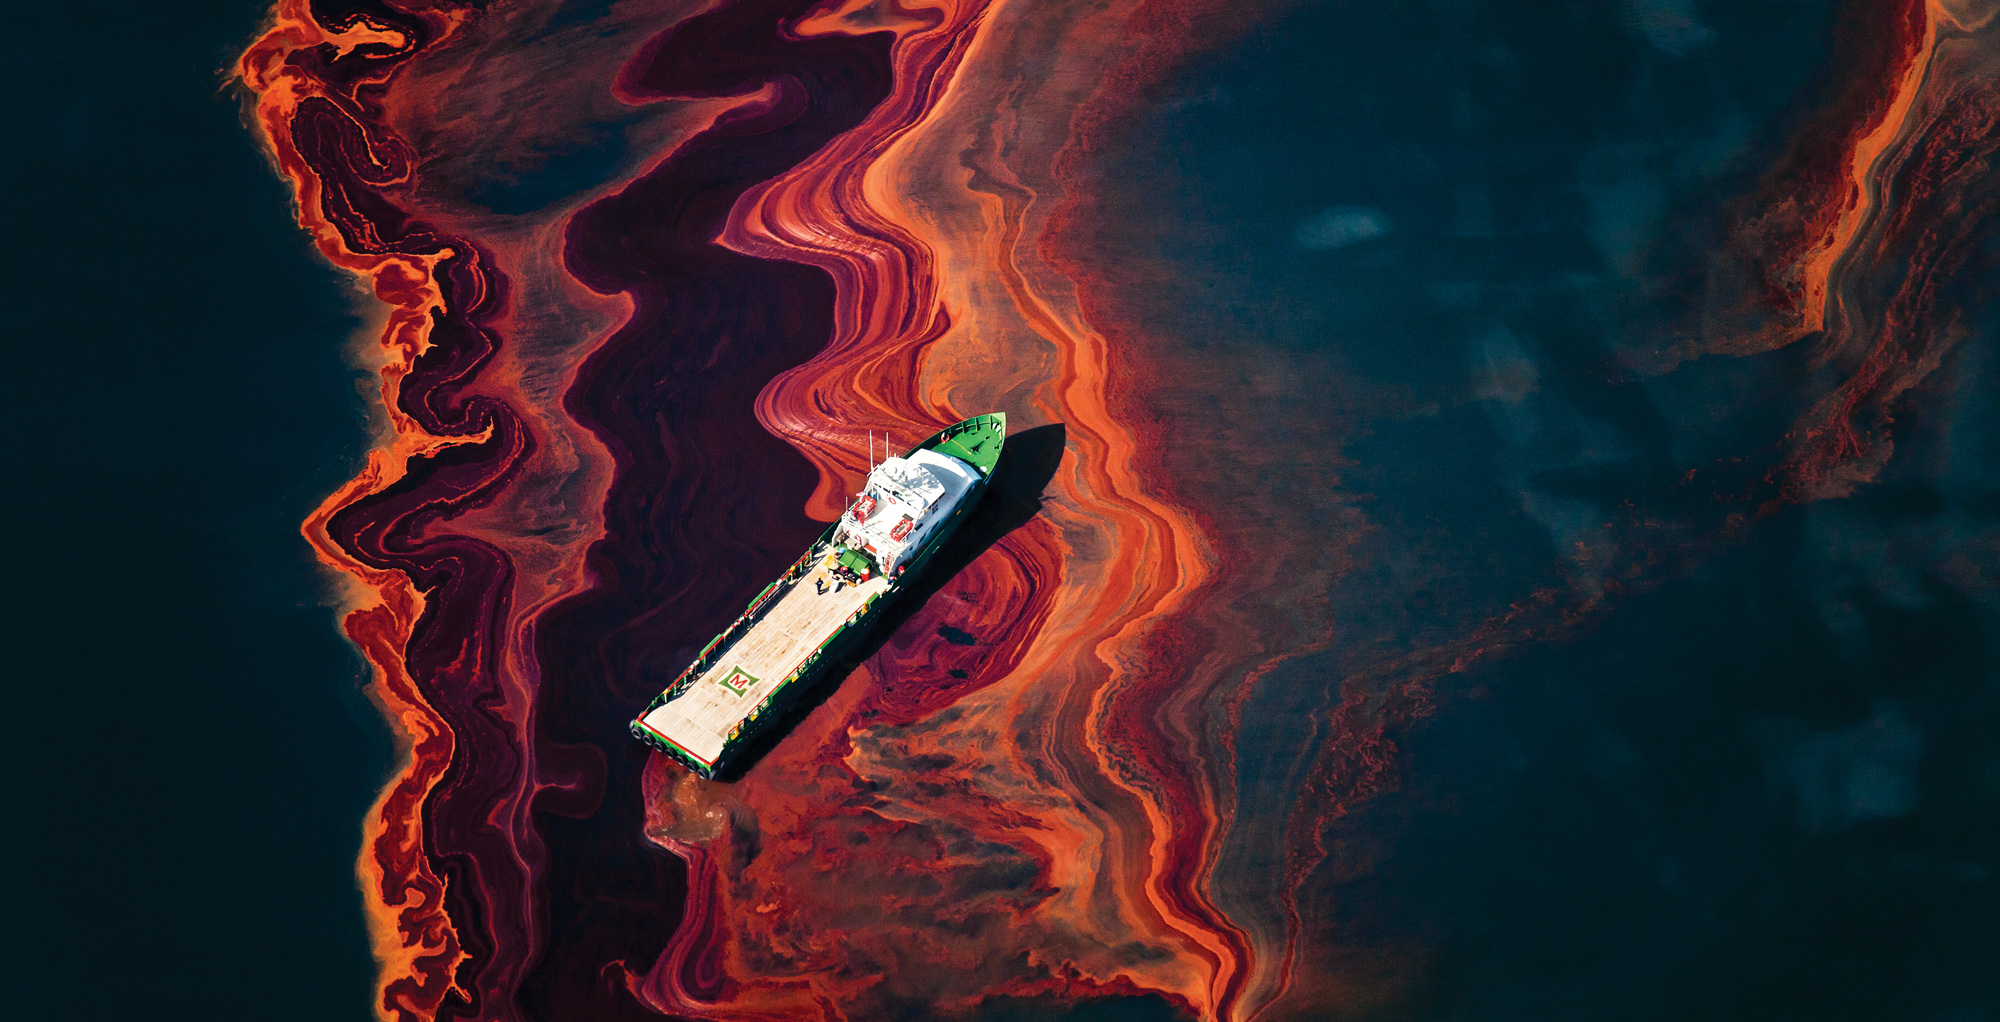 The Single Oil Spill That Can Disrupt the Global Energy Supply